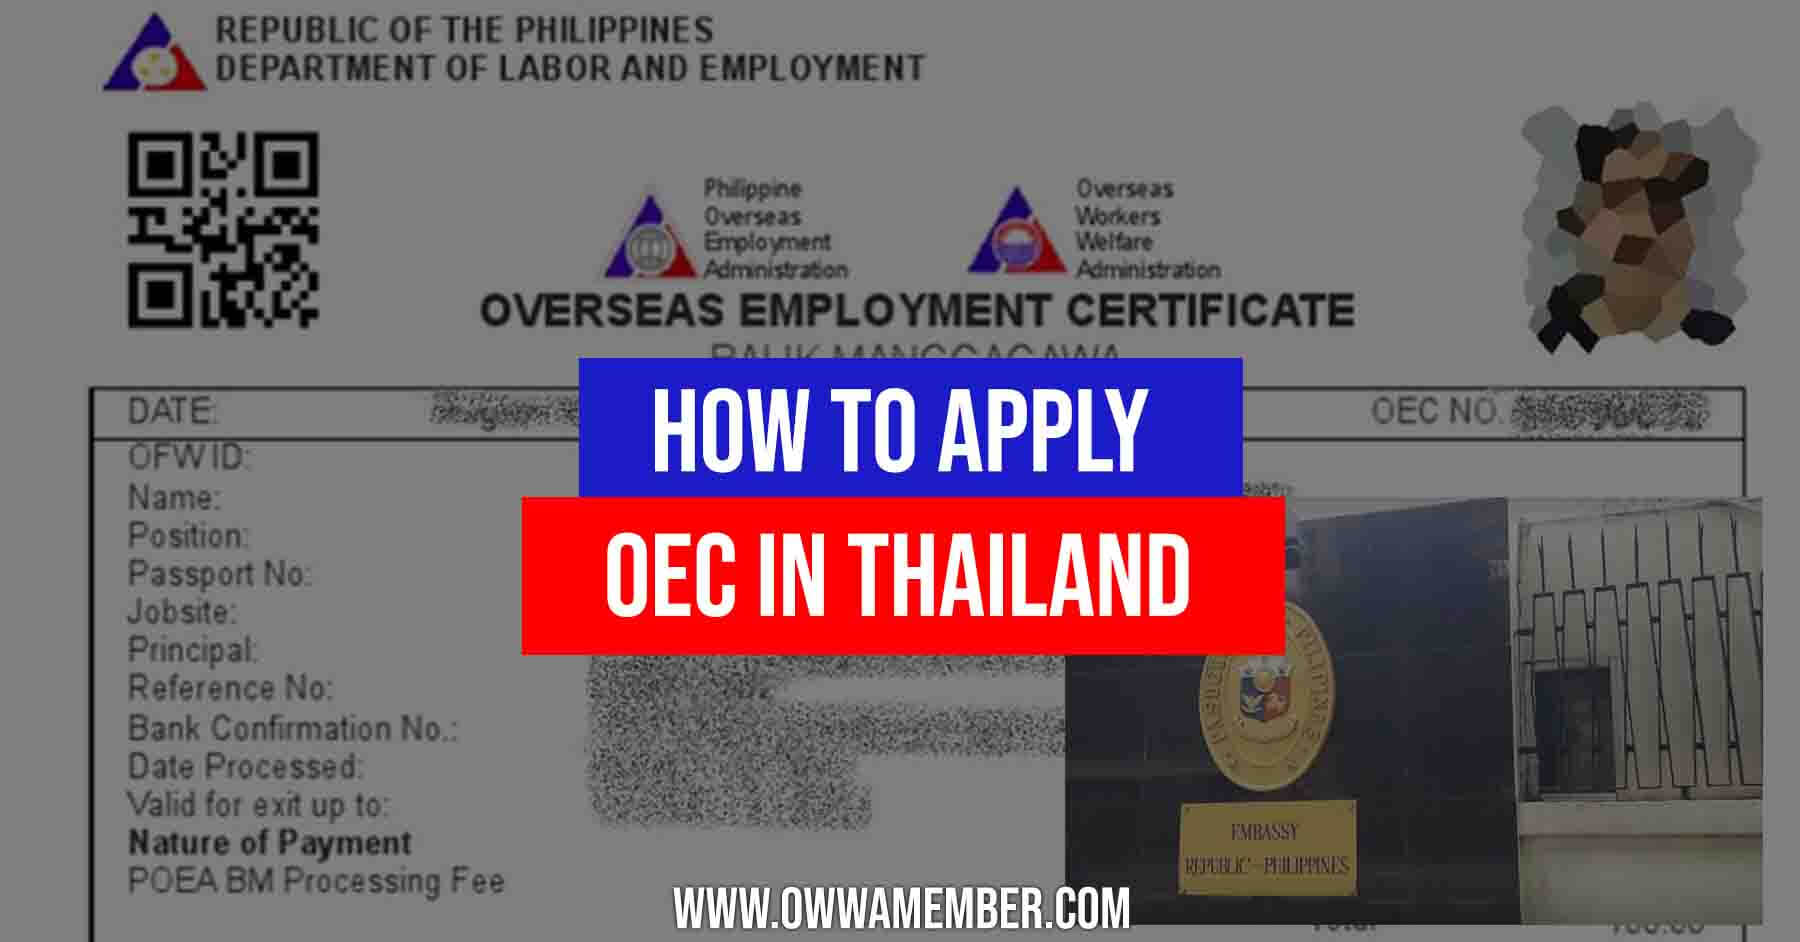 how to apply oec overseas employment certificate thailand